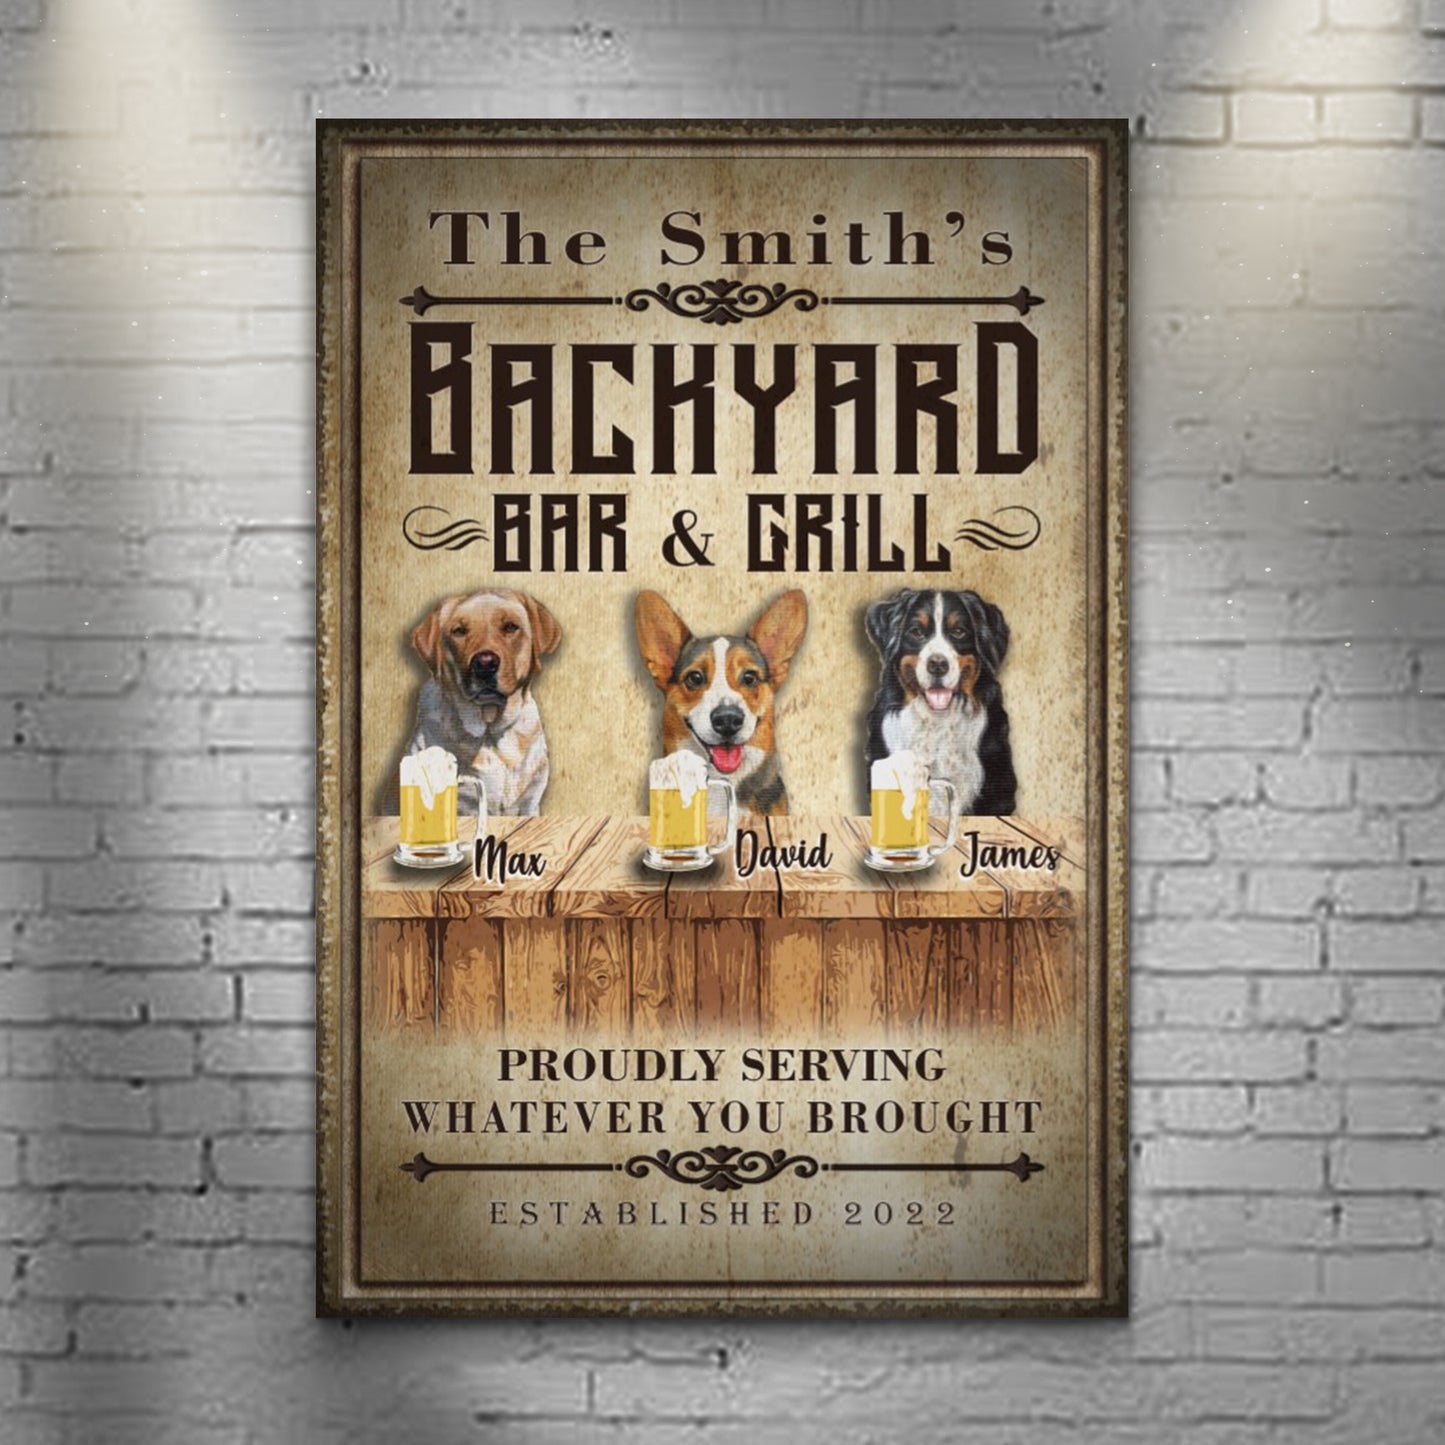 Custom Backyard Bar and Grill Proudly Serving Whatever You Brought (READY TO HANG) - Wall Art Image by Tailored Canvases